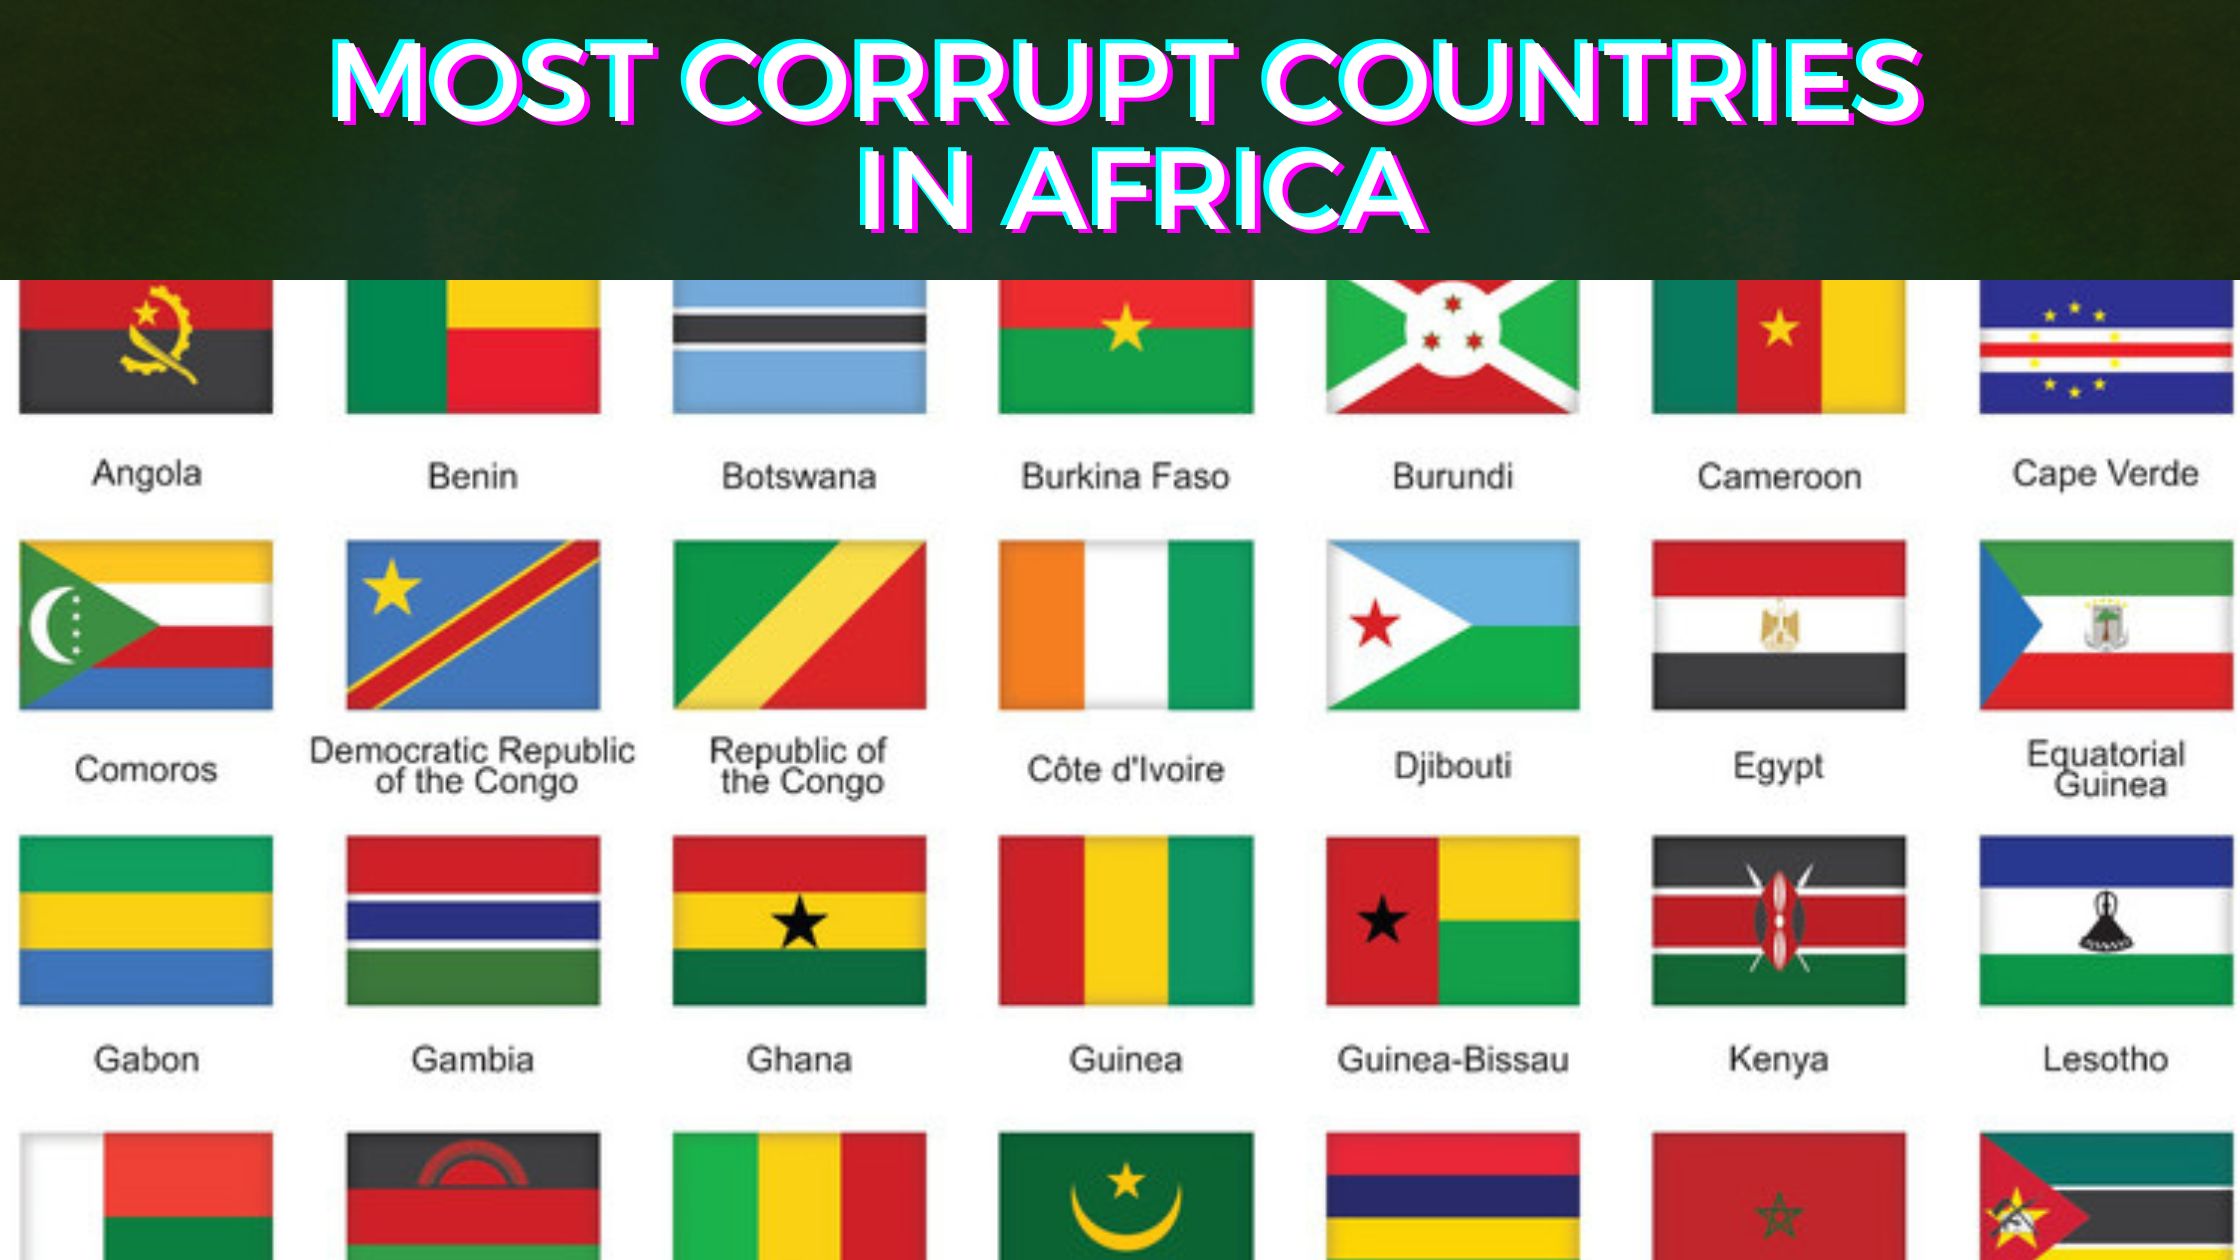 Top 10 Most Corrupt Countries in Africa 2022